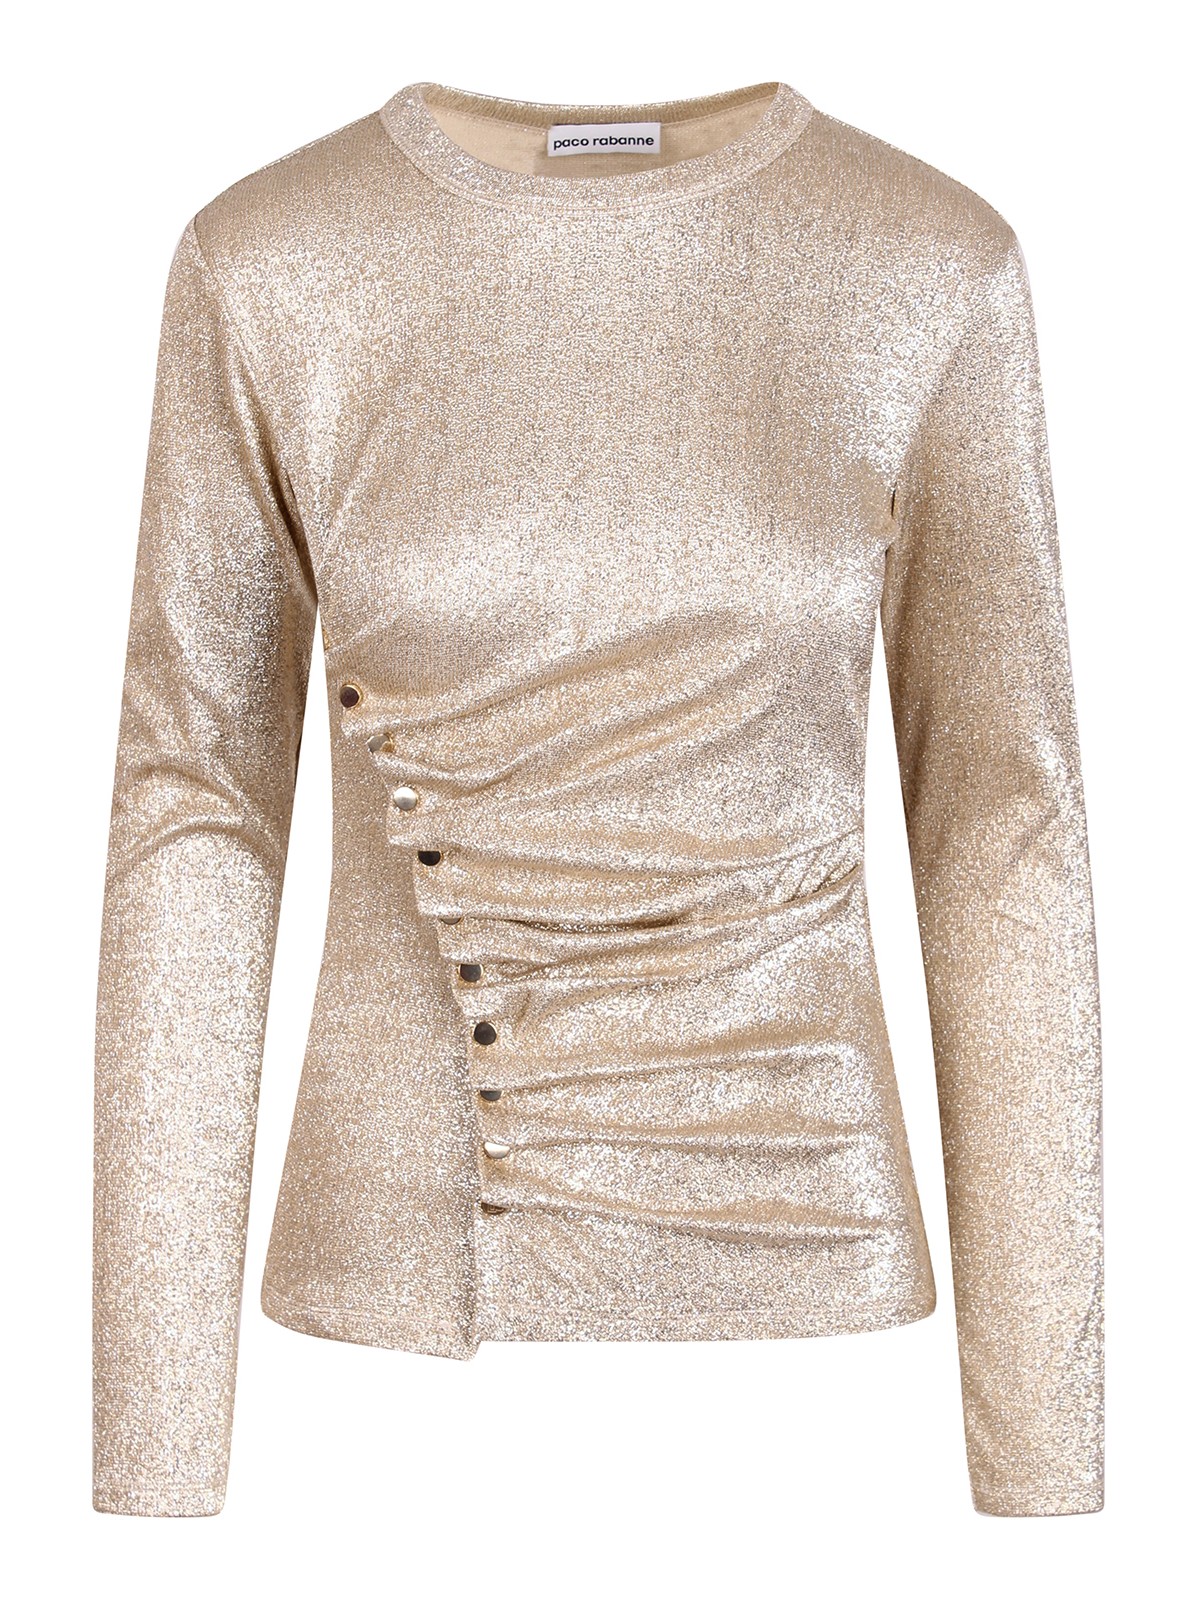 Paco Rabanne Draped Blouse In Gold